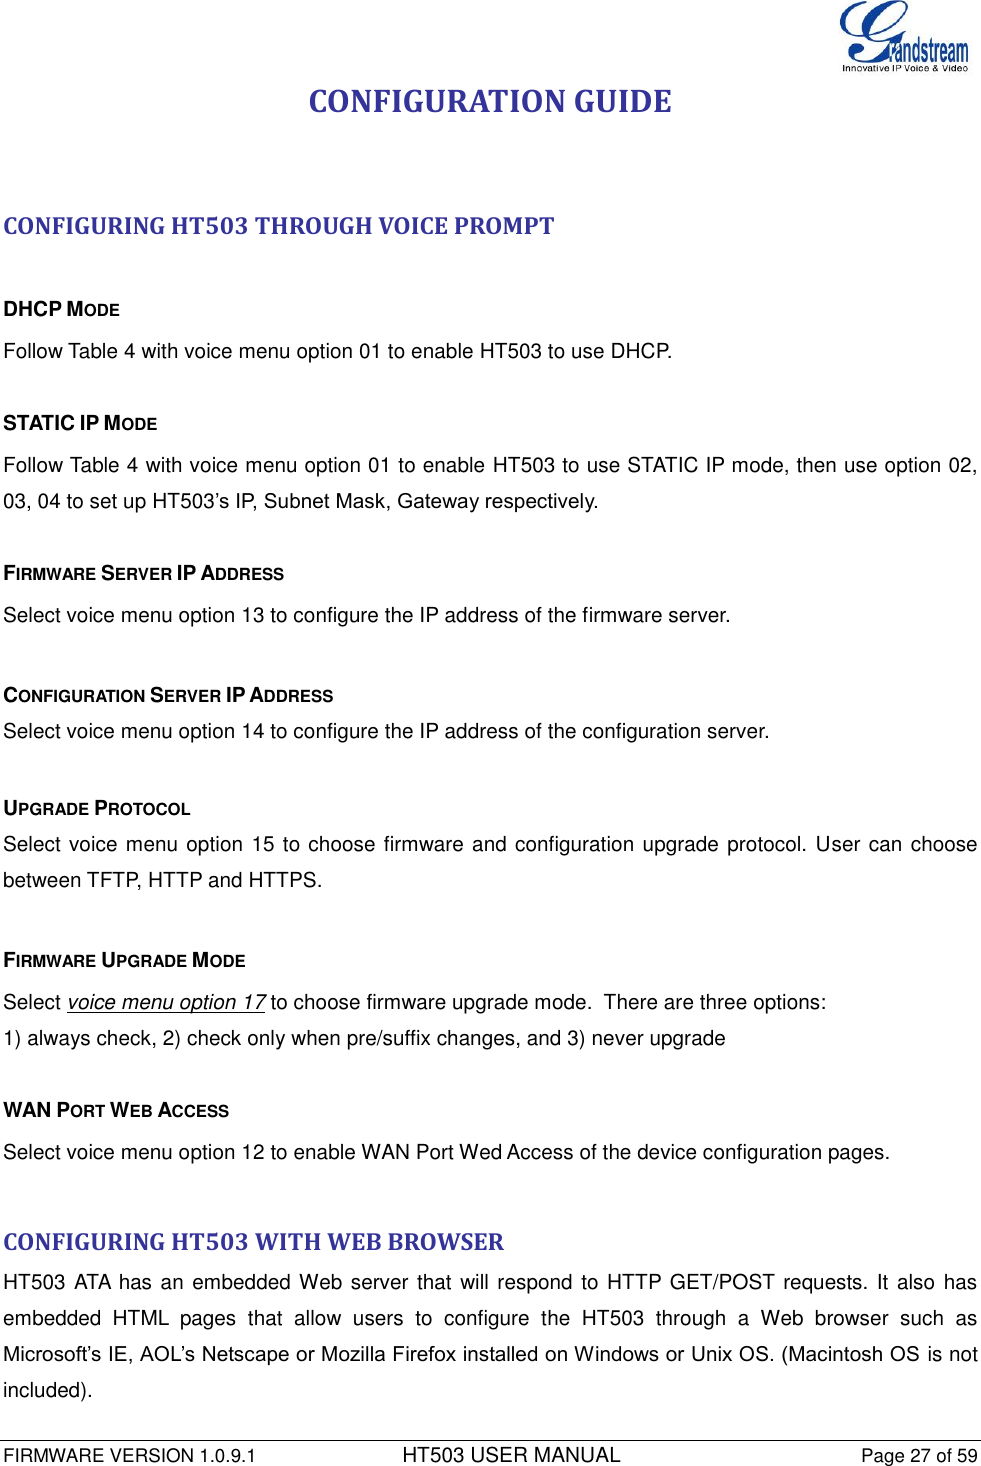  FIRMWARE VERSION 1.0.9.1          HT503 USER MANUAL Page 27 of 59       CONFIGURATION GUIDE   CONFIGURING HT503 THROUGH VOICE PROMPT   DHCP MODE Follow Table 4 with voice menu option 01 to enable HT503 to use DHCP.  STATIC IP MODE  Follow Table 4 with voice menu option 01 to enable HT503 to use STATIC IP mode, then use option 02, 03, 04 to set up HT503’s IP, Subnet Mask, Gateway respectively.  FIRMWARE SERVER IP ADDRESS  Select voice menu option 13 to configure the IP address of the firmware server.   CONFIGURATION SERVER IP ADDRESS Select voice menu option 14 to configure the IP address of the configuration server.   UPGRADE PROTOCOL Select voice menu option 15 to choose firmware and configuration upgrade protocol. User can choose between TFTP, HTTP and HTTPS.  FIRMWARE UPGRADE MODE  Select voice menu option 17 to choose firmware upgrade mode.  There are three options: 1) always check, 2) check only when pre/suffix changes, and 3) never upgrade  WAN PORT WEB ACCESS  Select voice menu option 12 to enable WAN Port Wed Access of the device configuration pages.  CONFIGURING HT503 WITH WEB BROWSER  HT503 ATA has an embedded Web server that will respond to HTTP GET/POST requests. It also has embedded  HTML  pages  that  allow  users  to  configure  the  HT503  through  a  Web  browser  such  as Microsoft’s IE, AOL’s Netscape or Mozilla Firefox installed on Windows or Unix OS. (Macintosh OS is not included).  